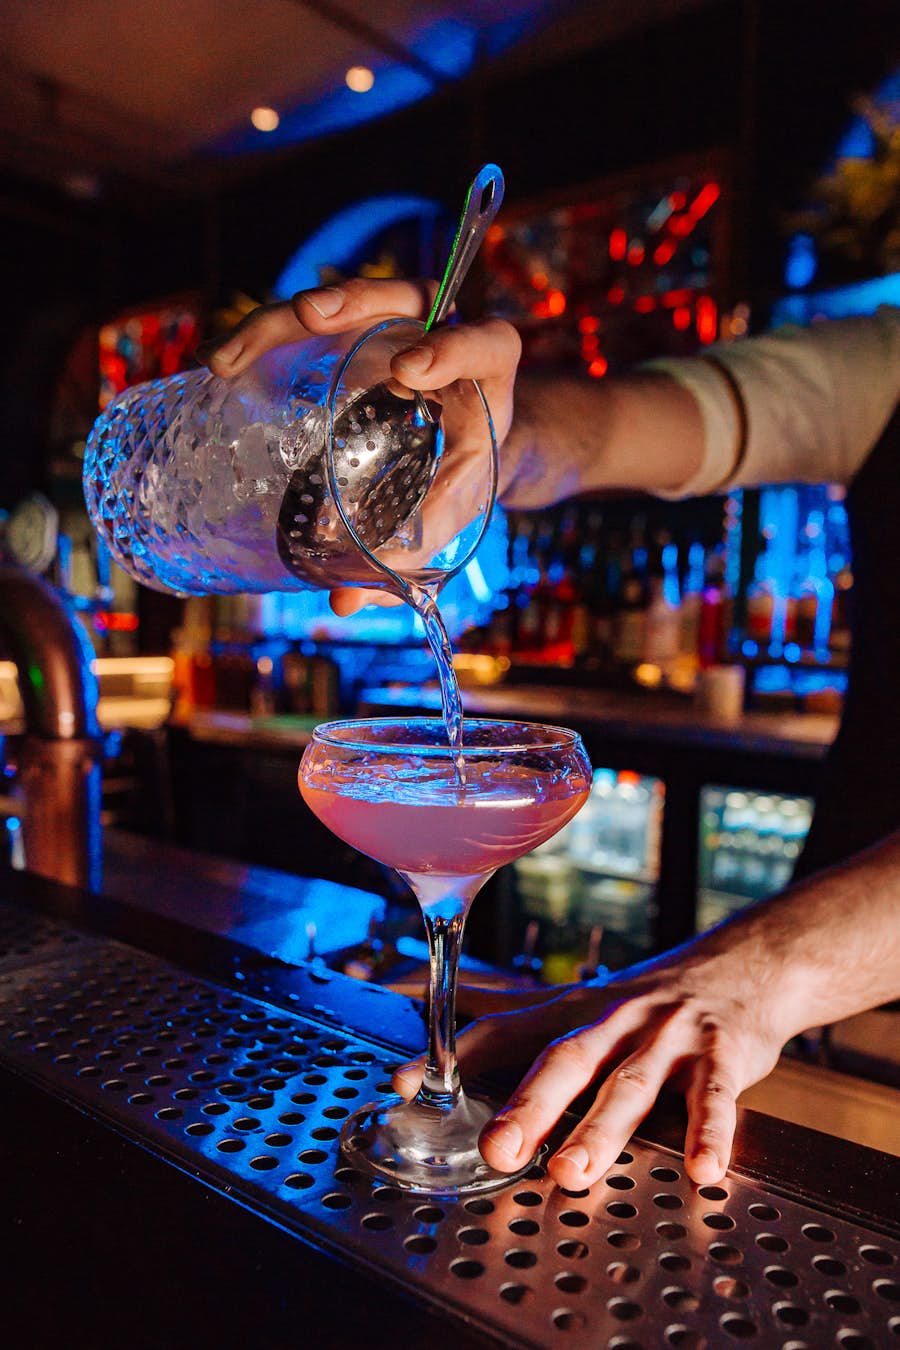 Bar tender pouring a pink cocktail